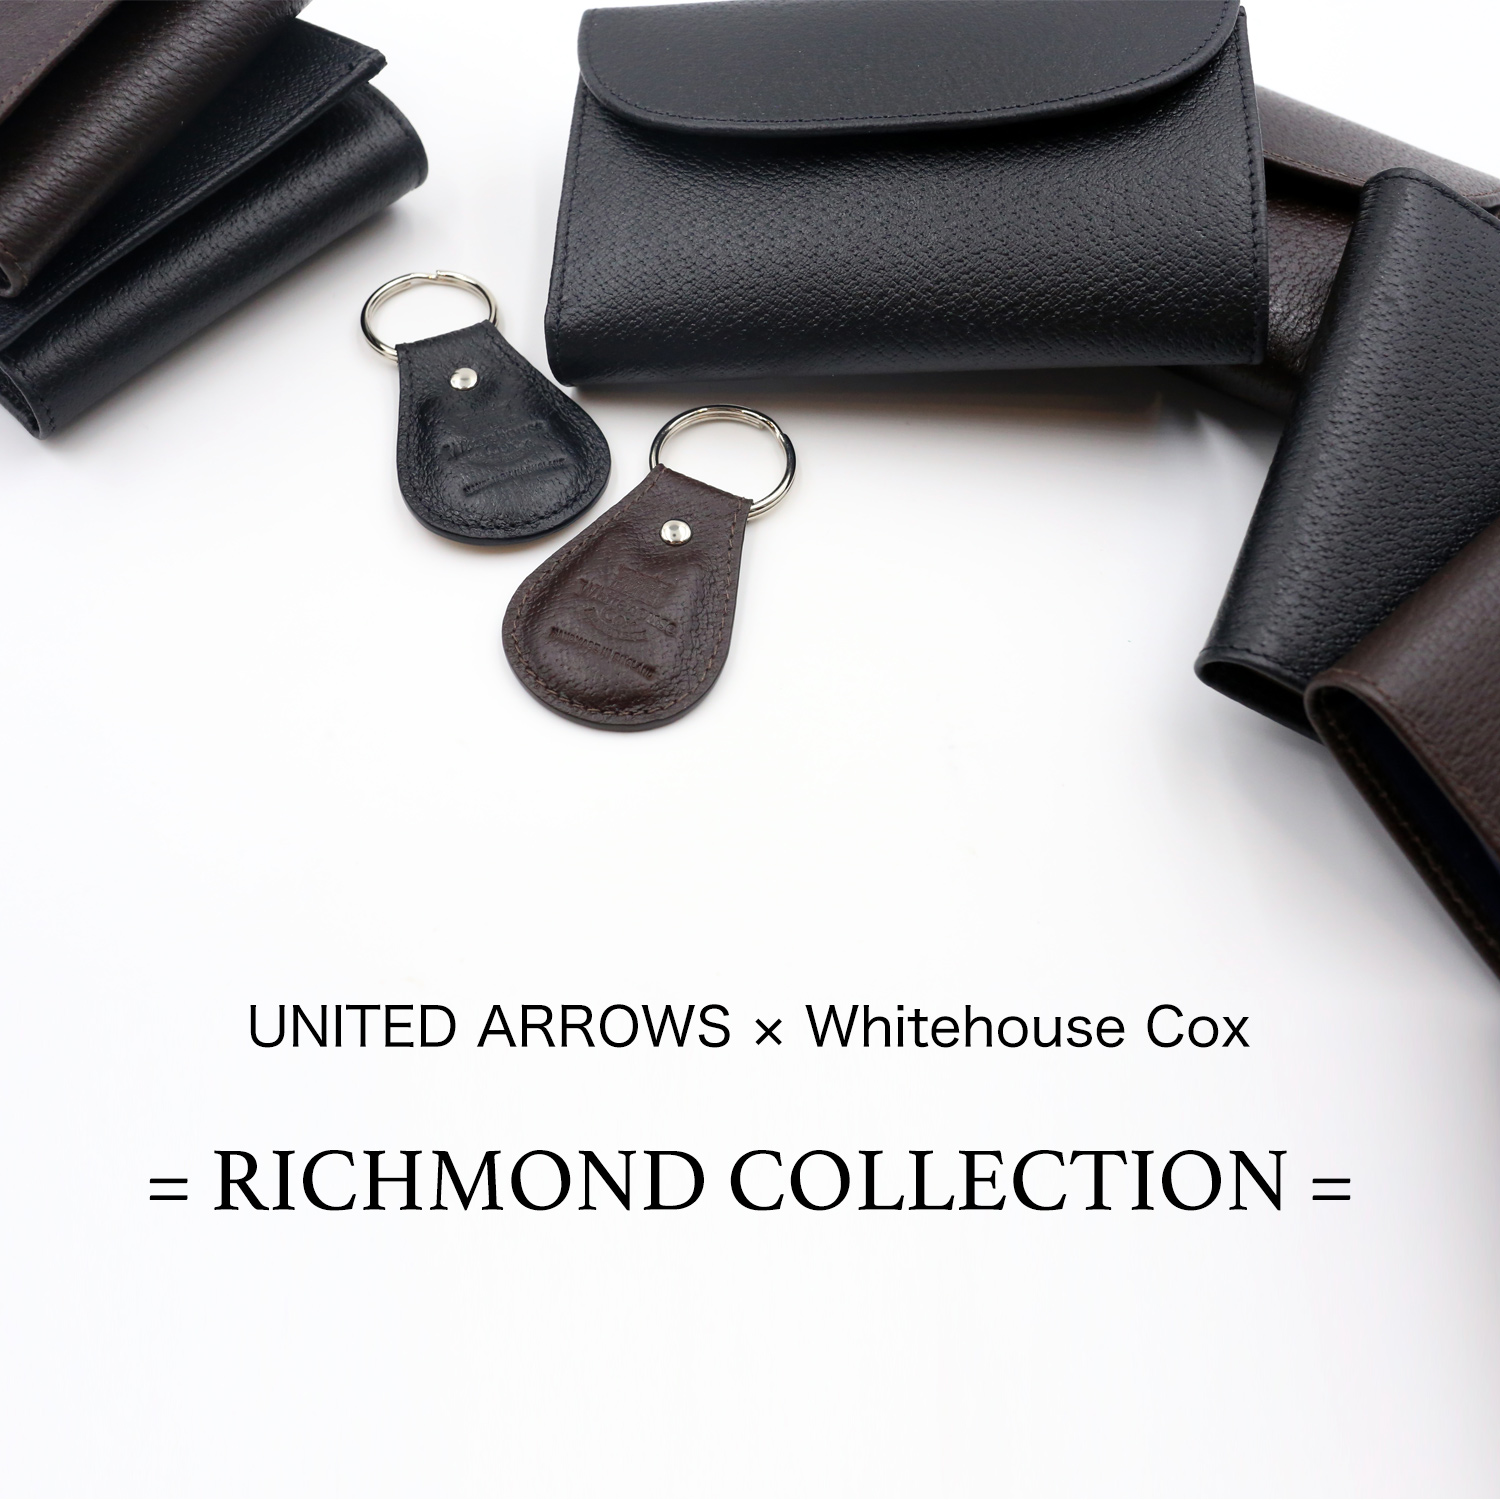 Whitehouse Cox × UNITED ARROWS RICHMOND COLLECTION